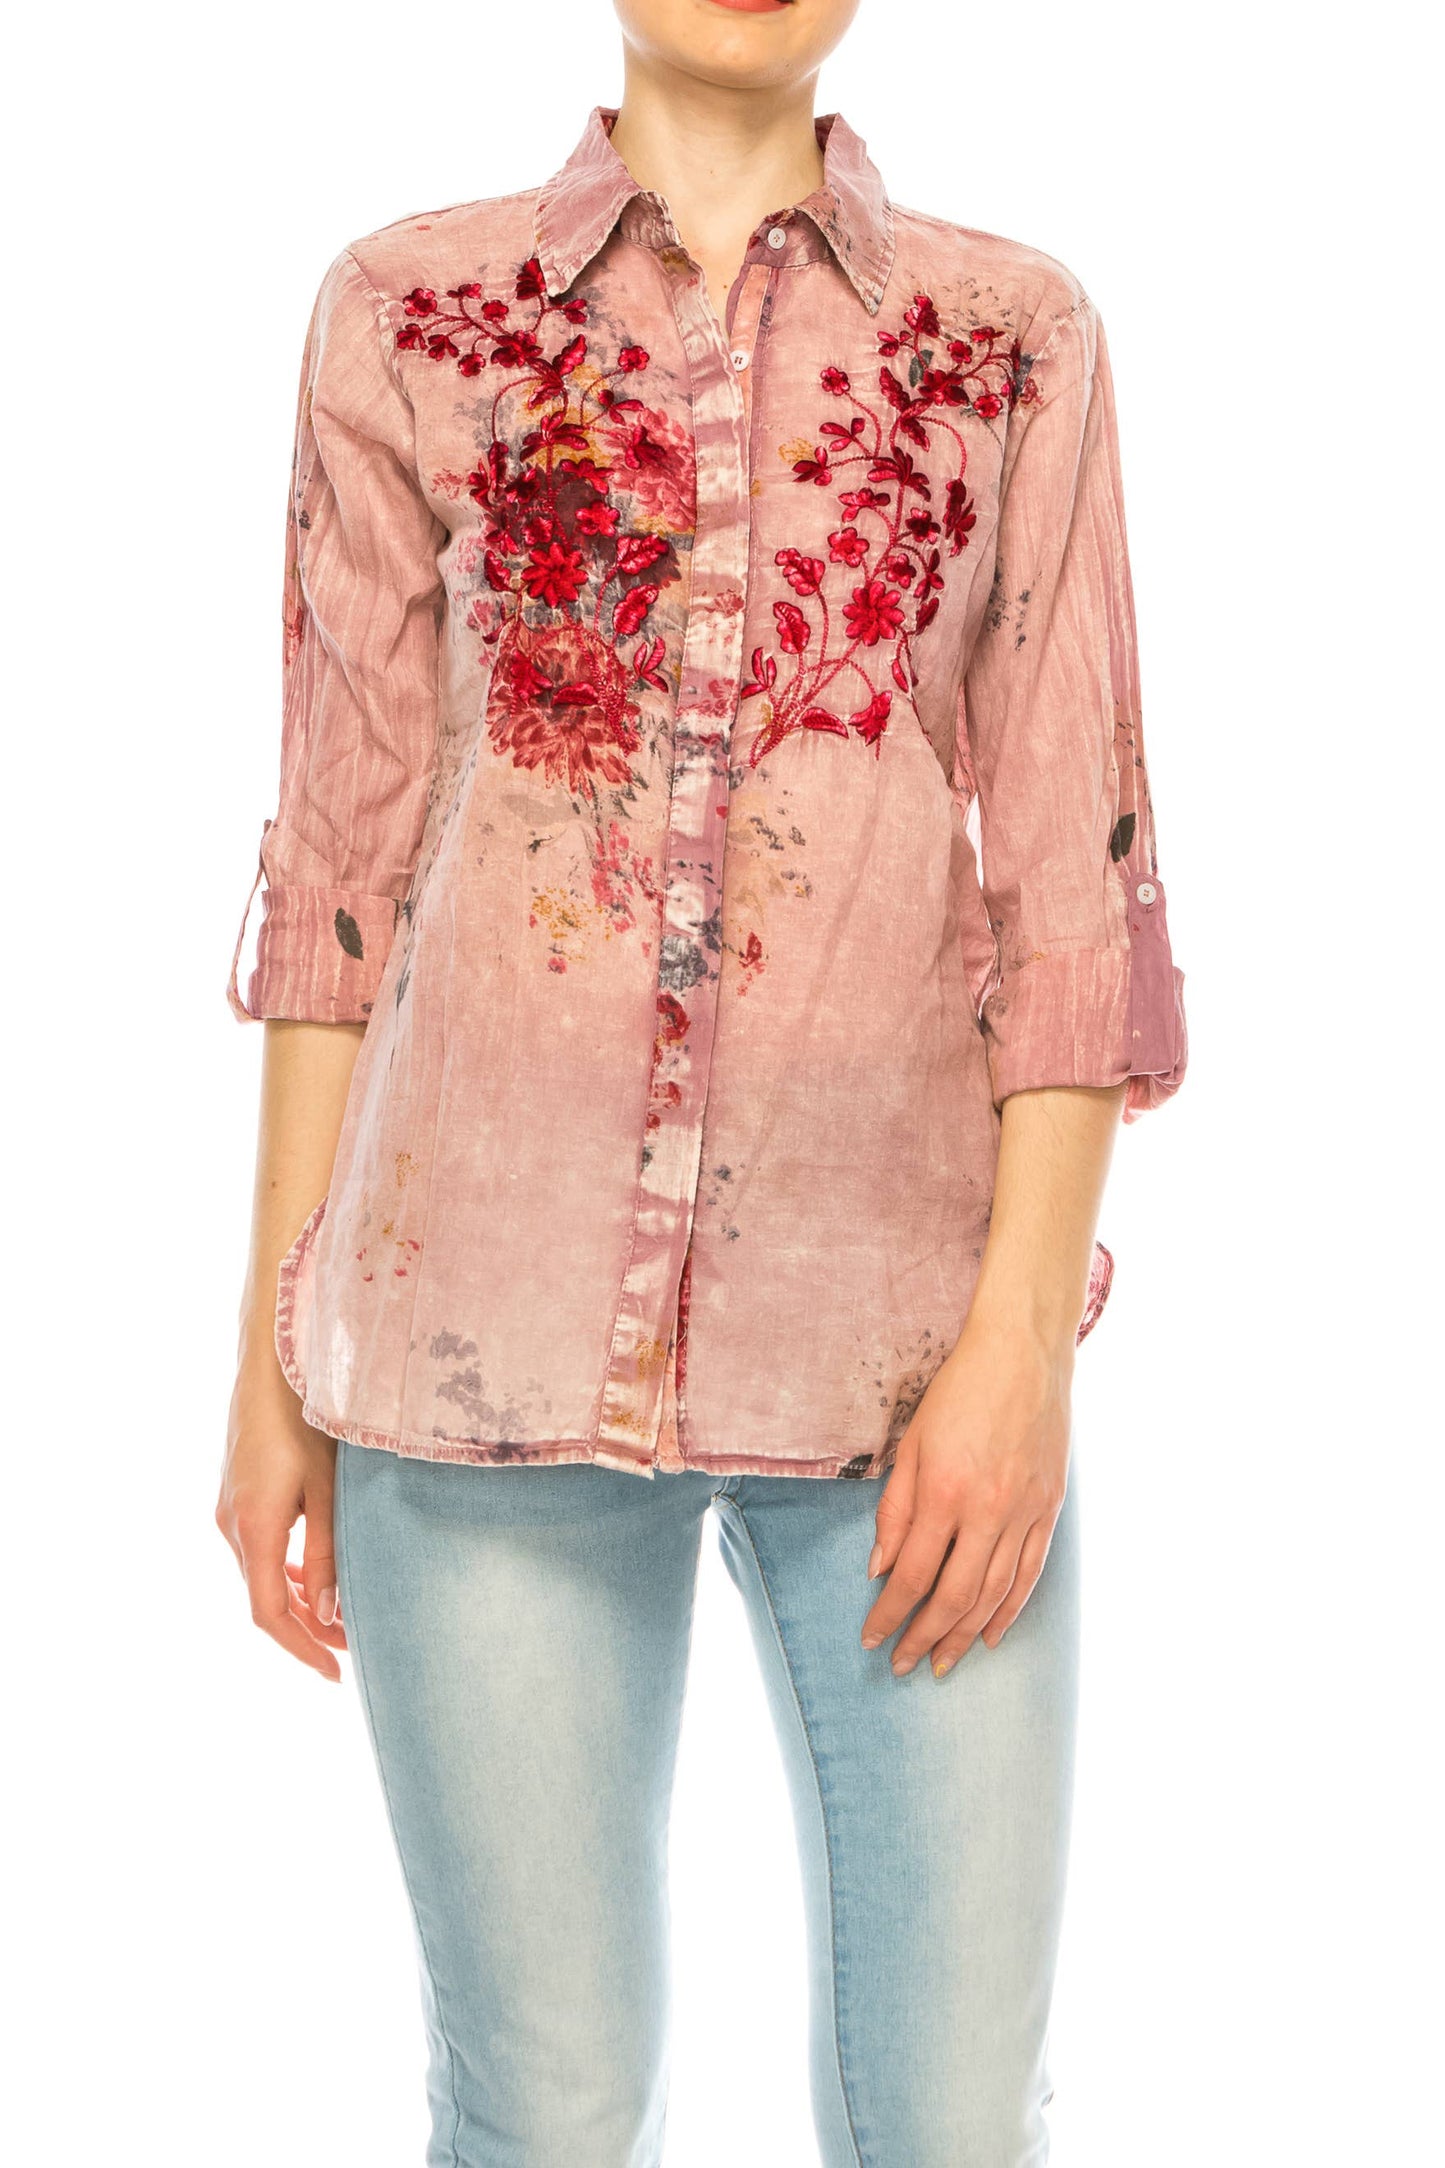 Magazine Clothing - Vintage Pink Floral Printed Shirt with Embroidery: Small